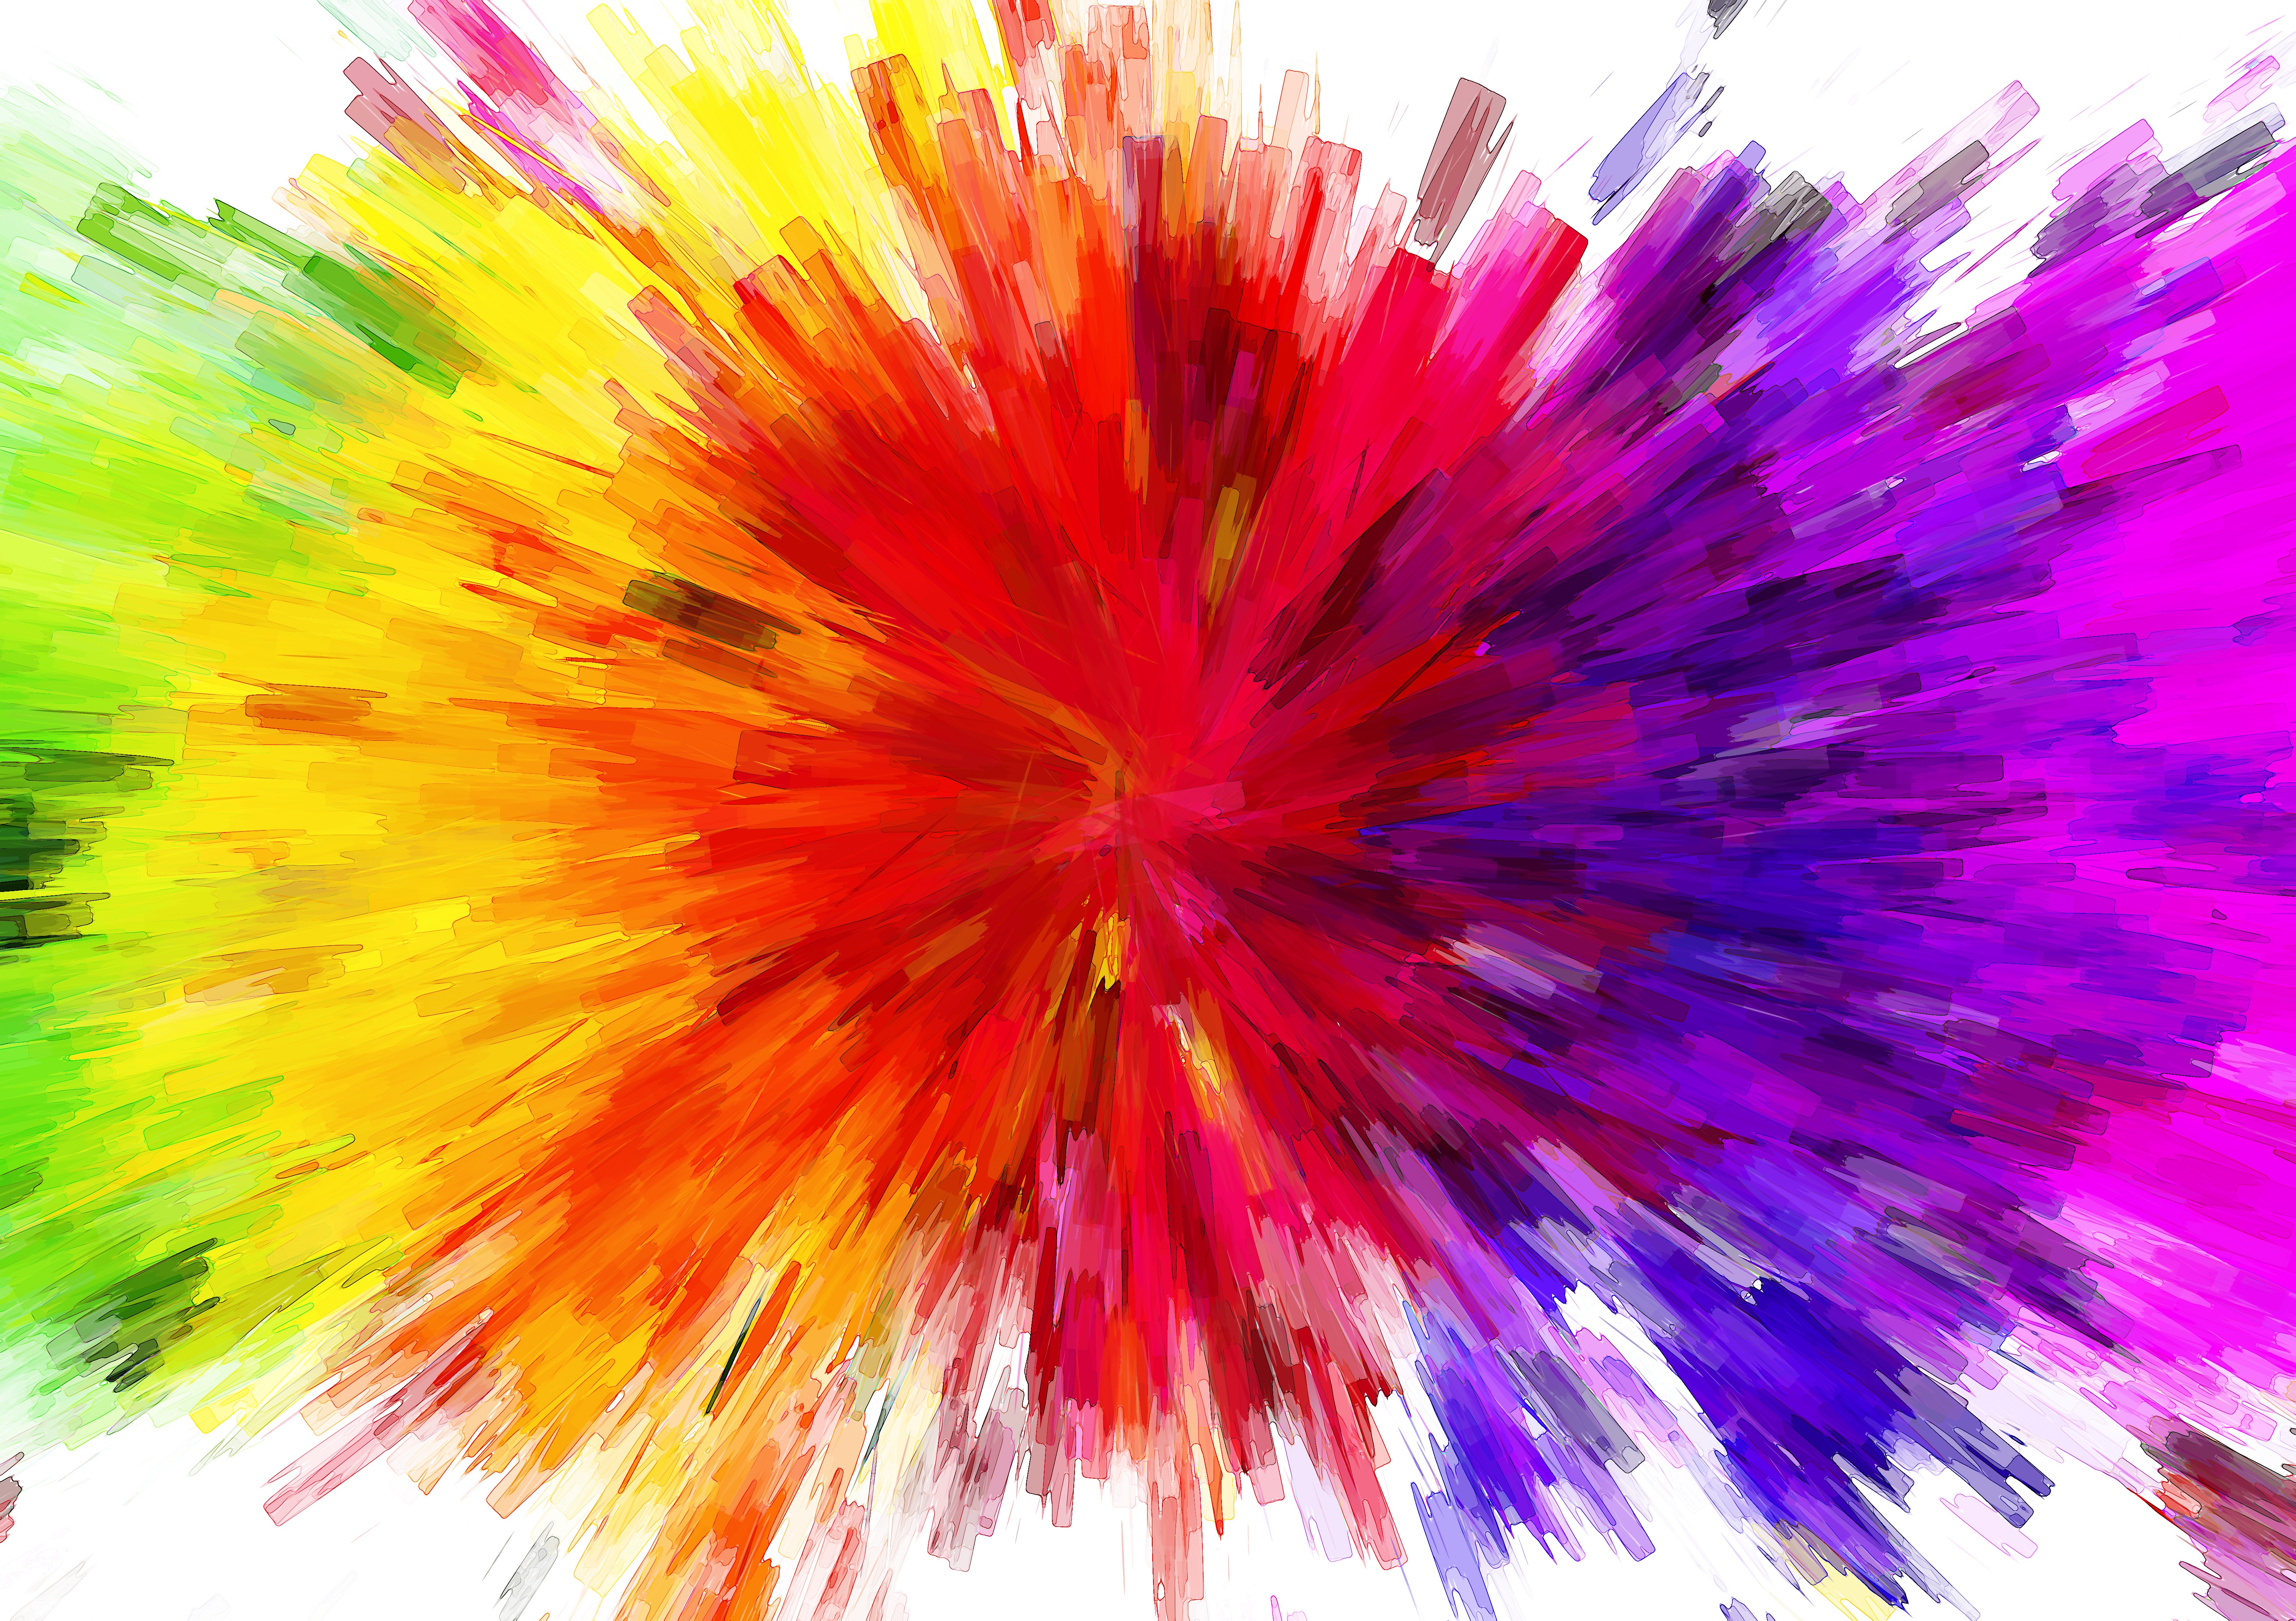 Colored Paint Splashes On A White Background Image